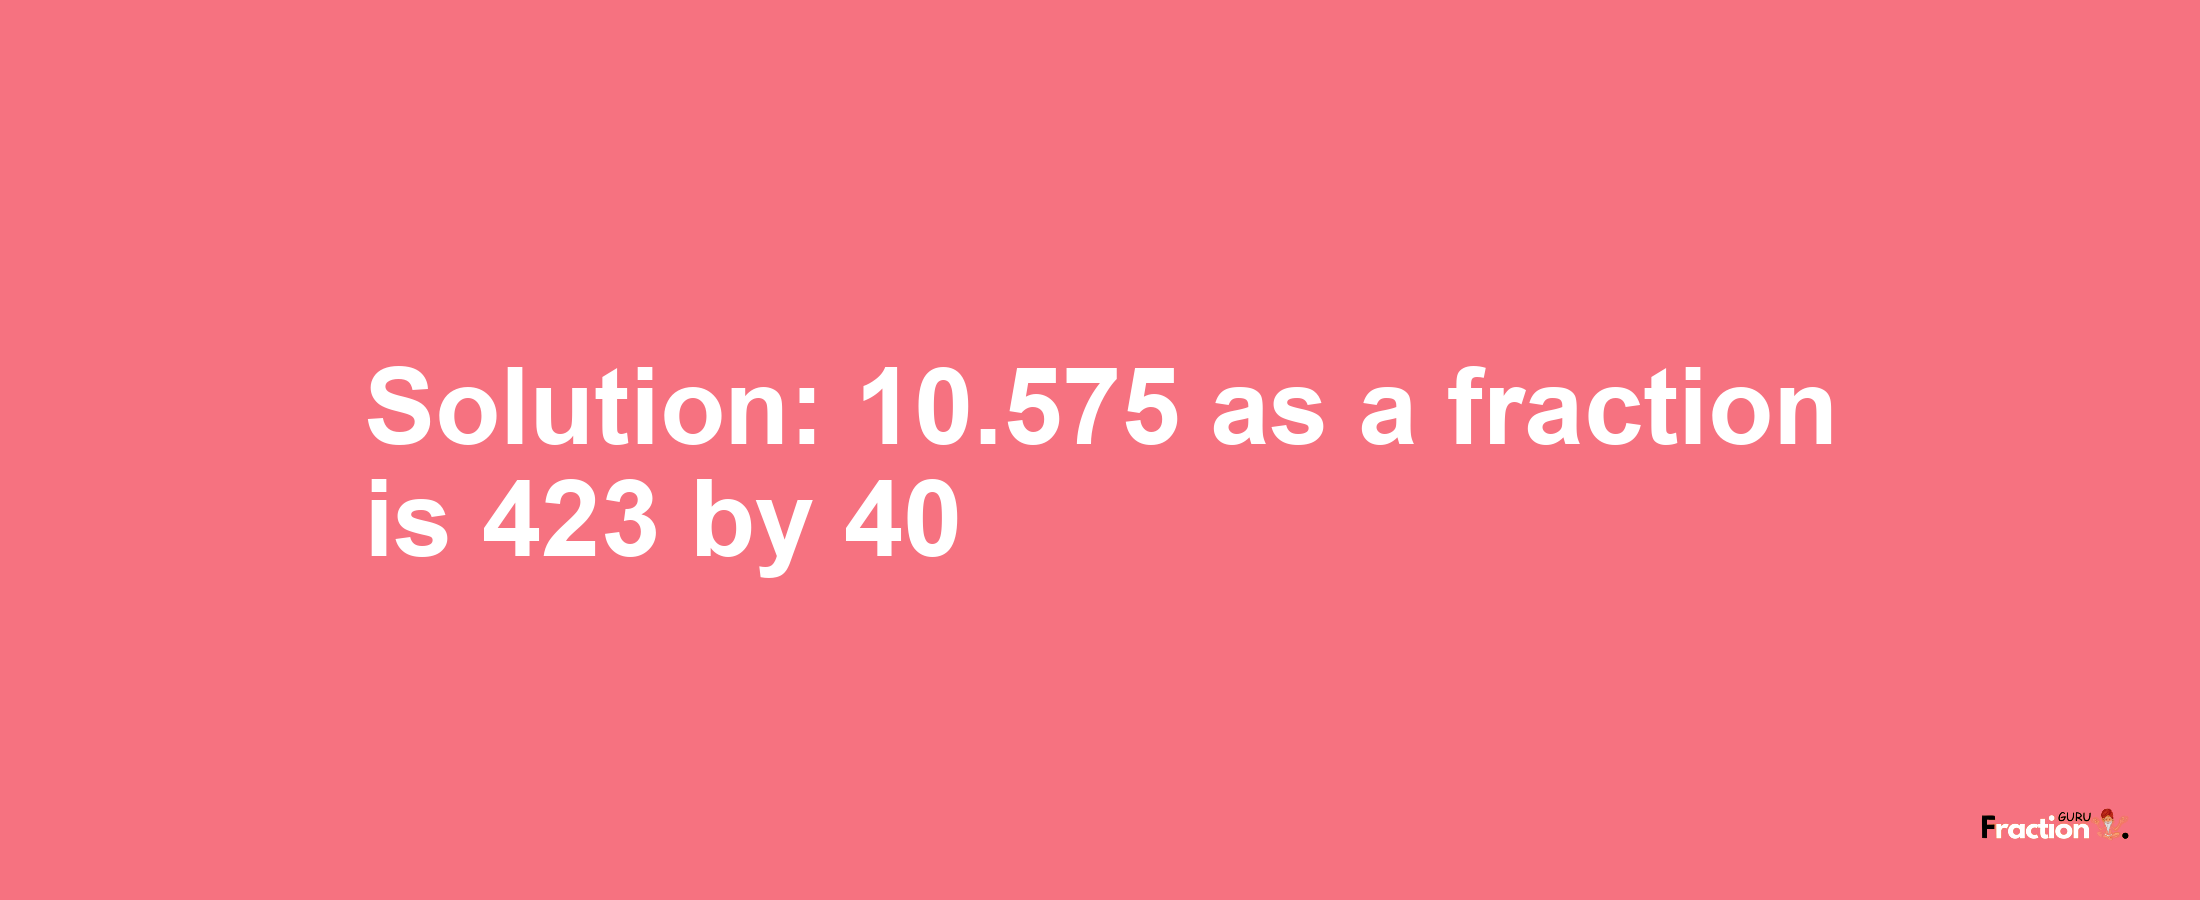 Solution:10.575 as a fraction is 423/40